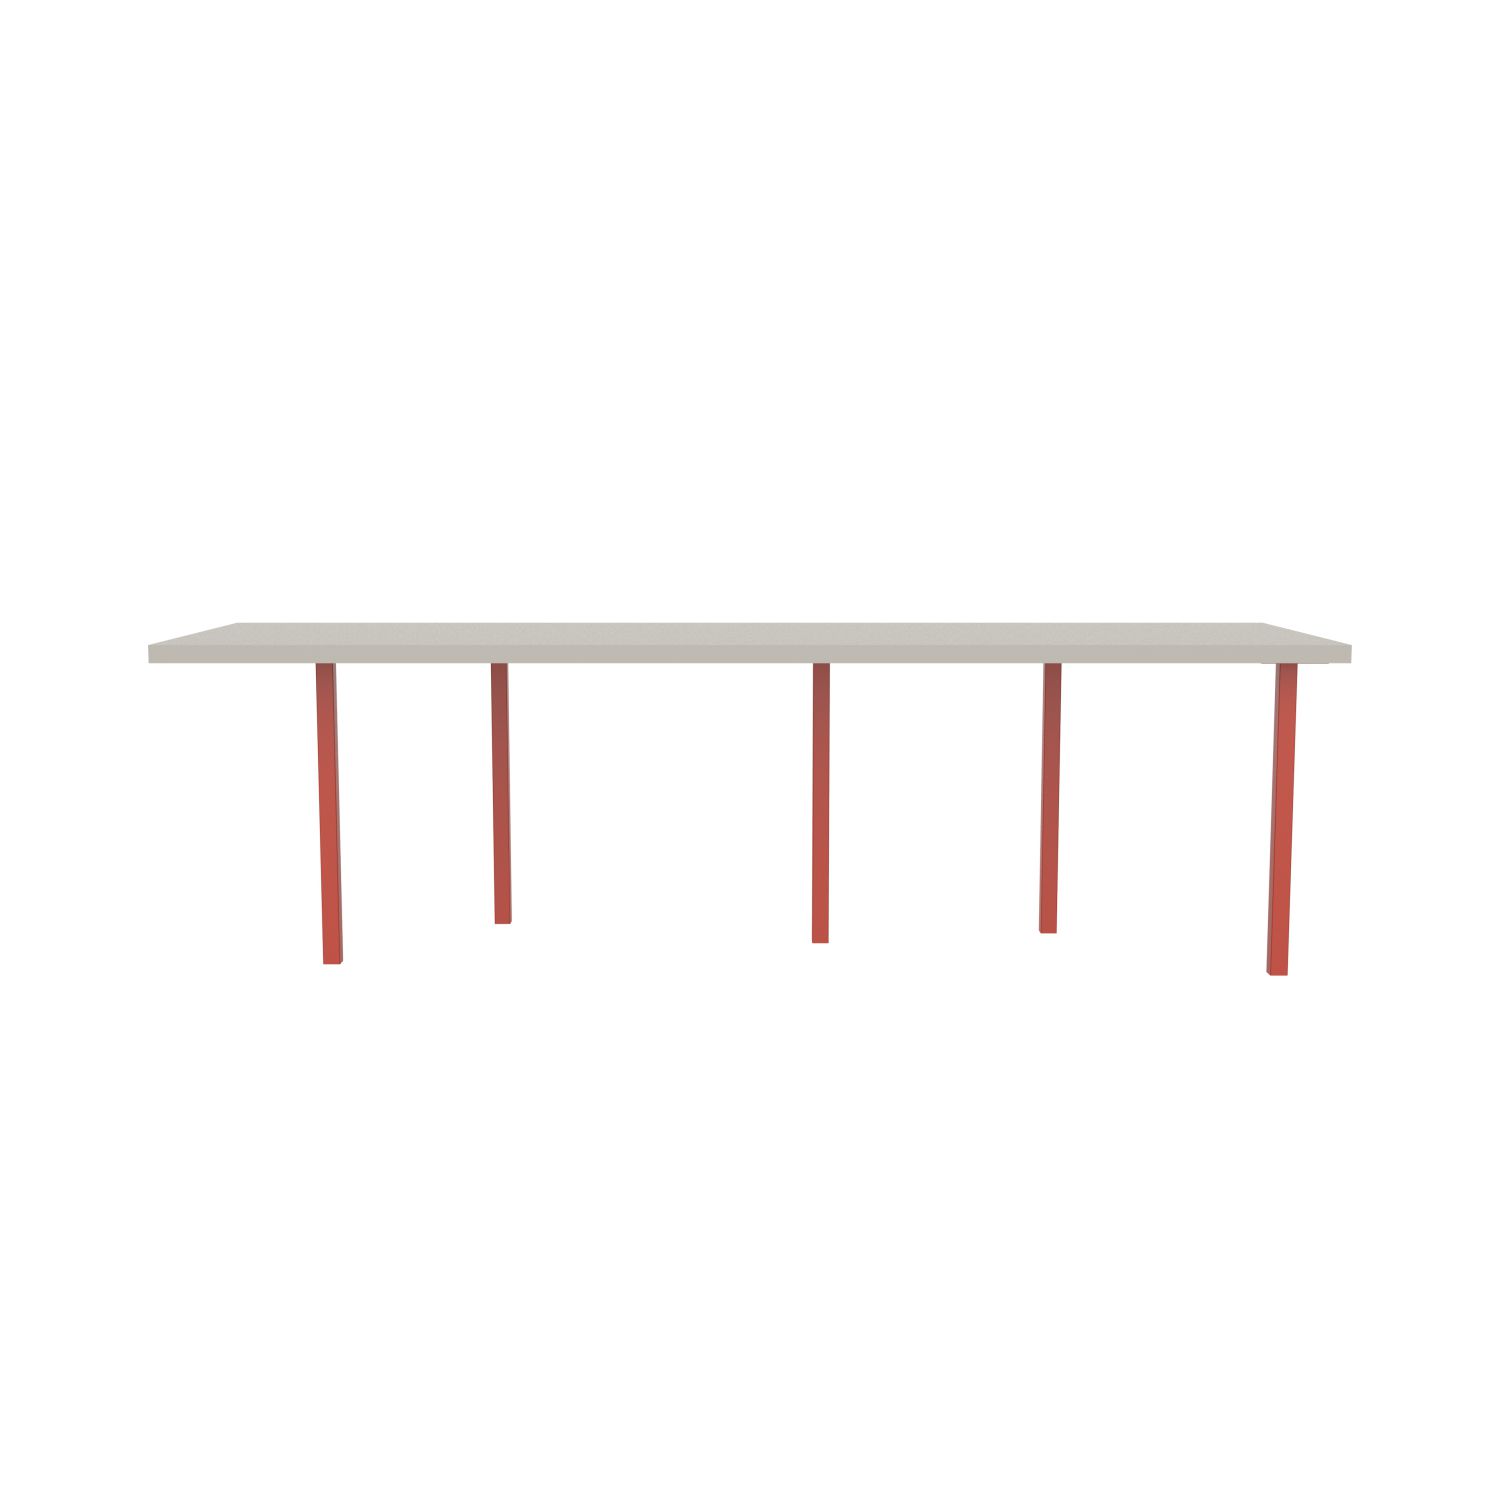 lensvelt bbrand table five fixed heigt 80x264 hpl white 50 mm price level 1 vermilion red ral2002